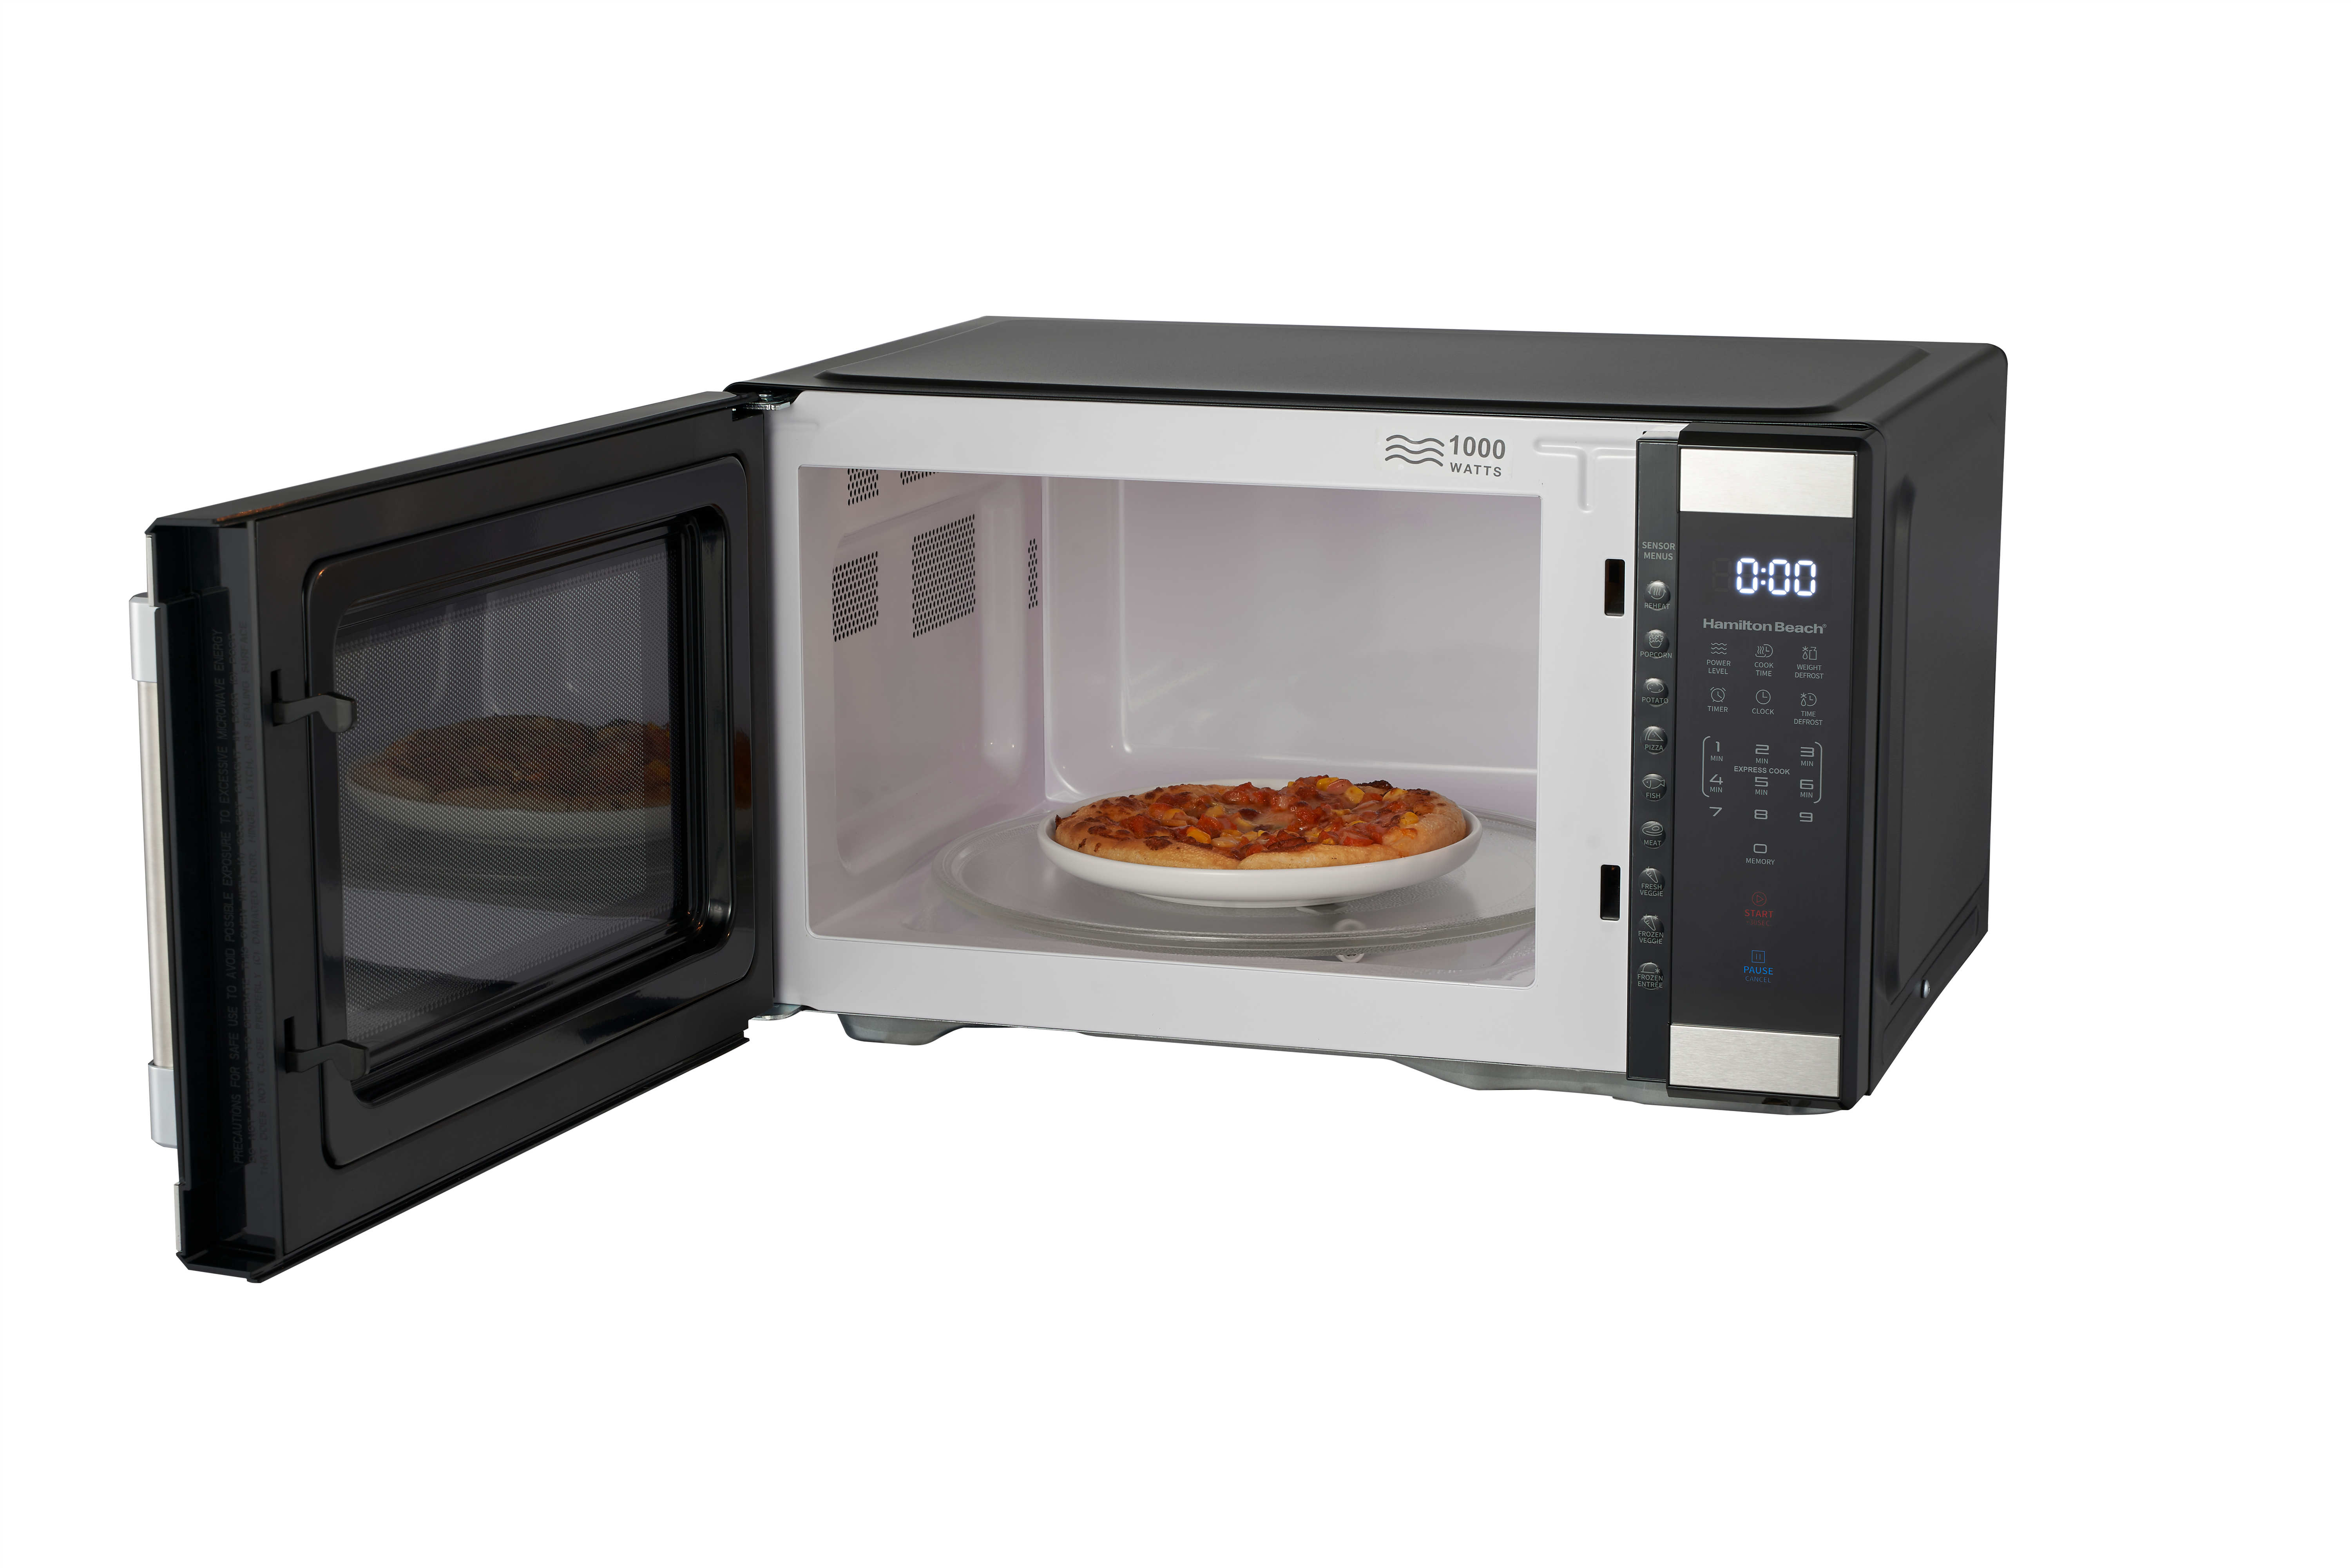 Hamilton Beach 1.1 cu ft Countertop Microwave Oven in Stainless Steel - image 5 of 8